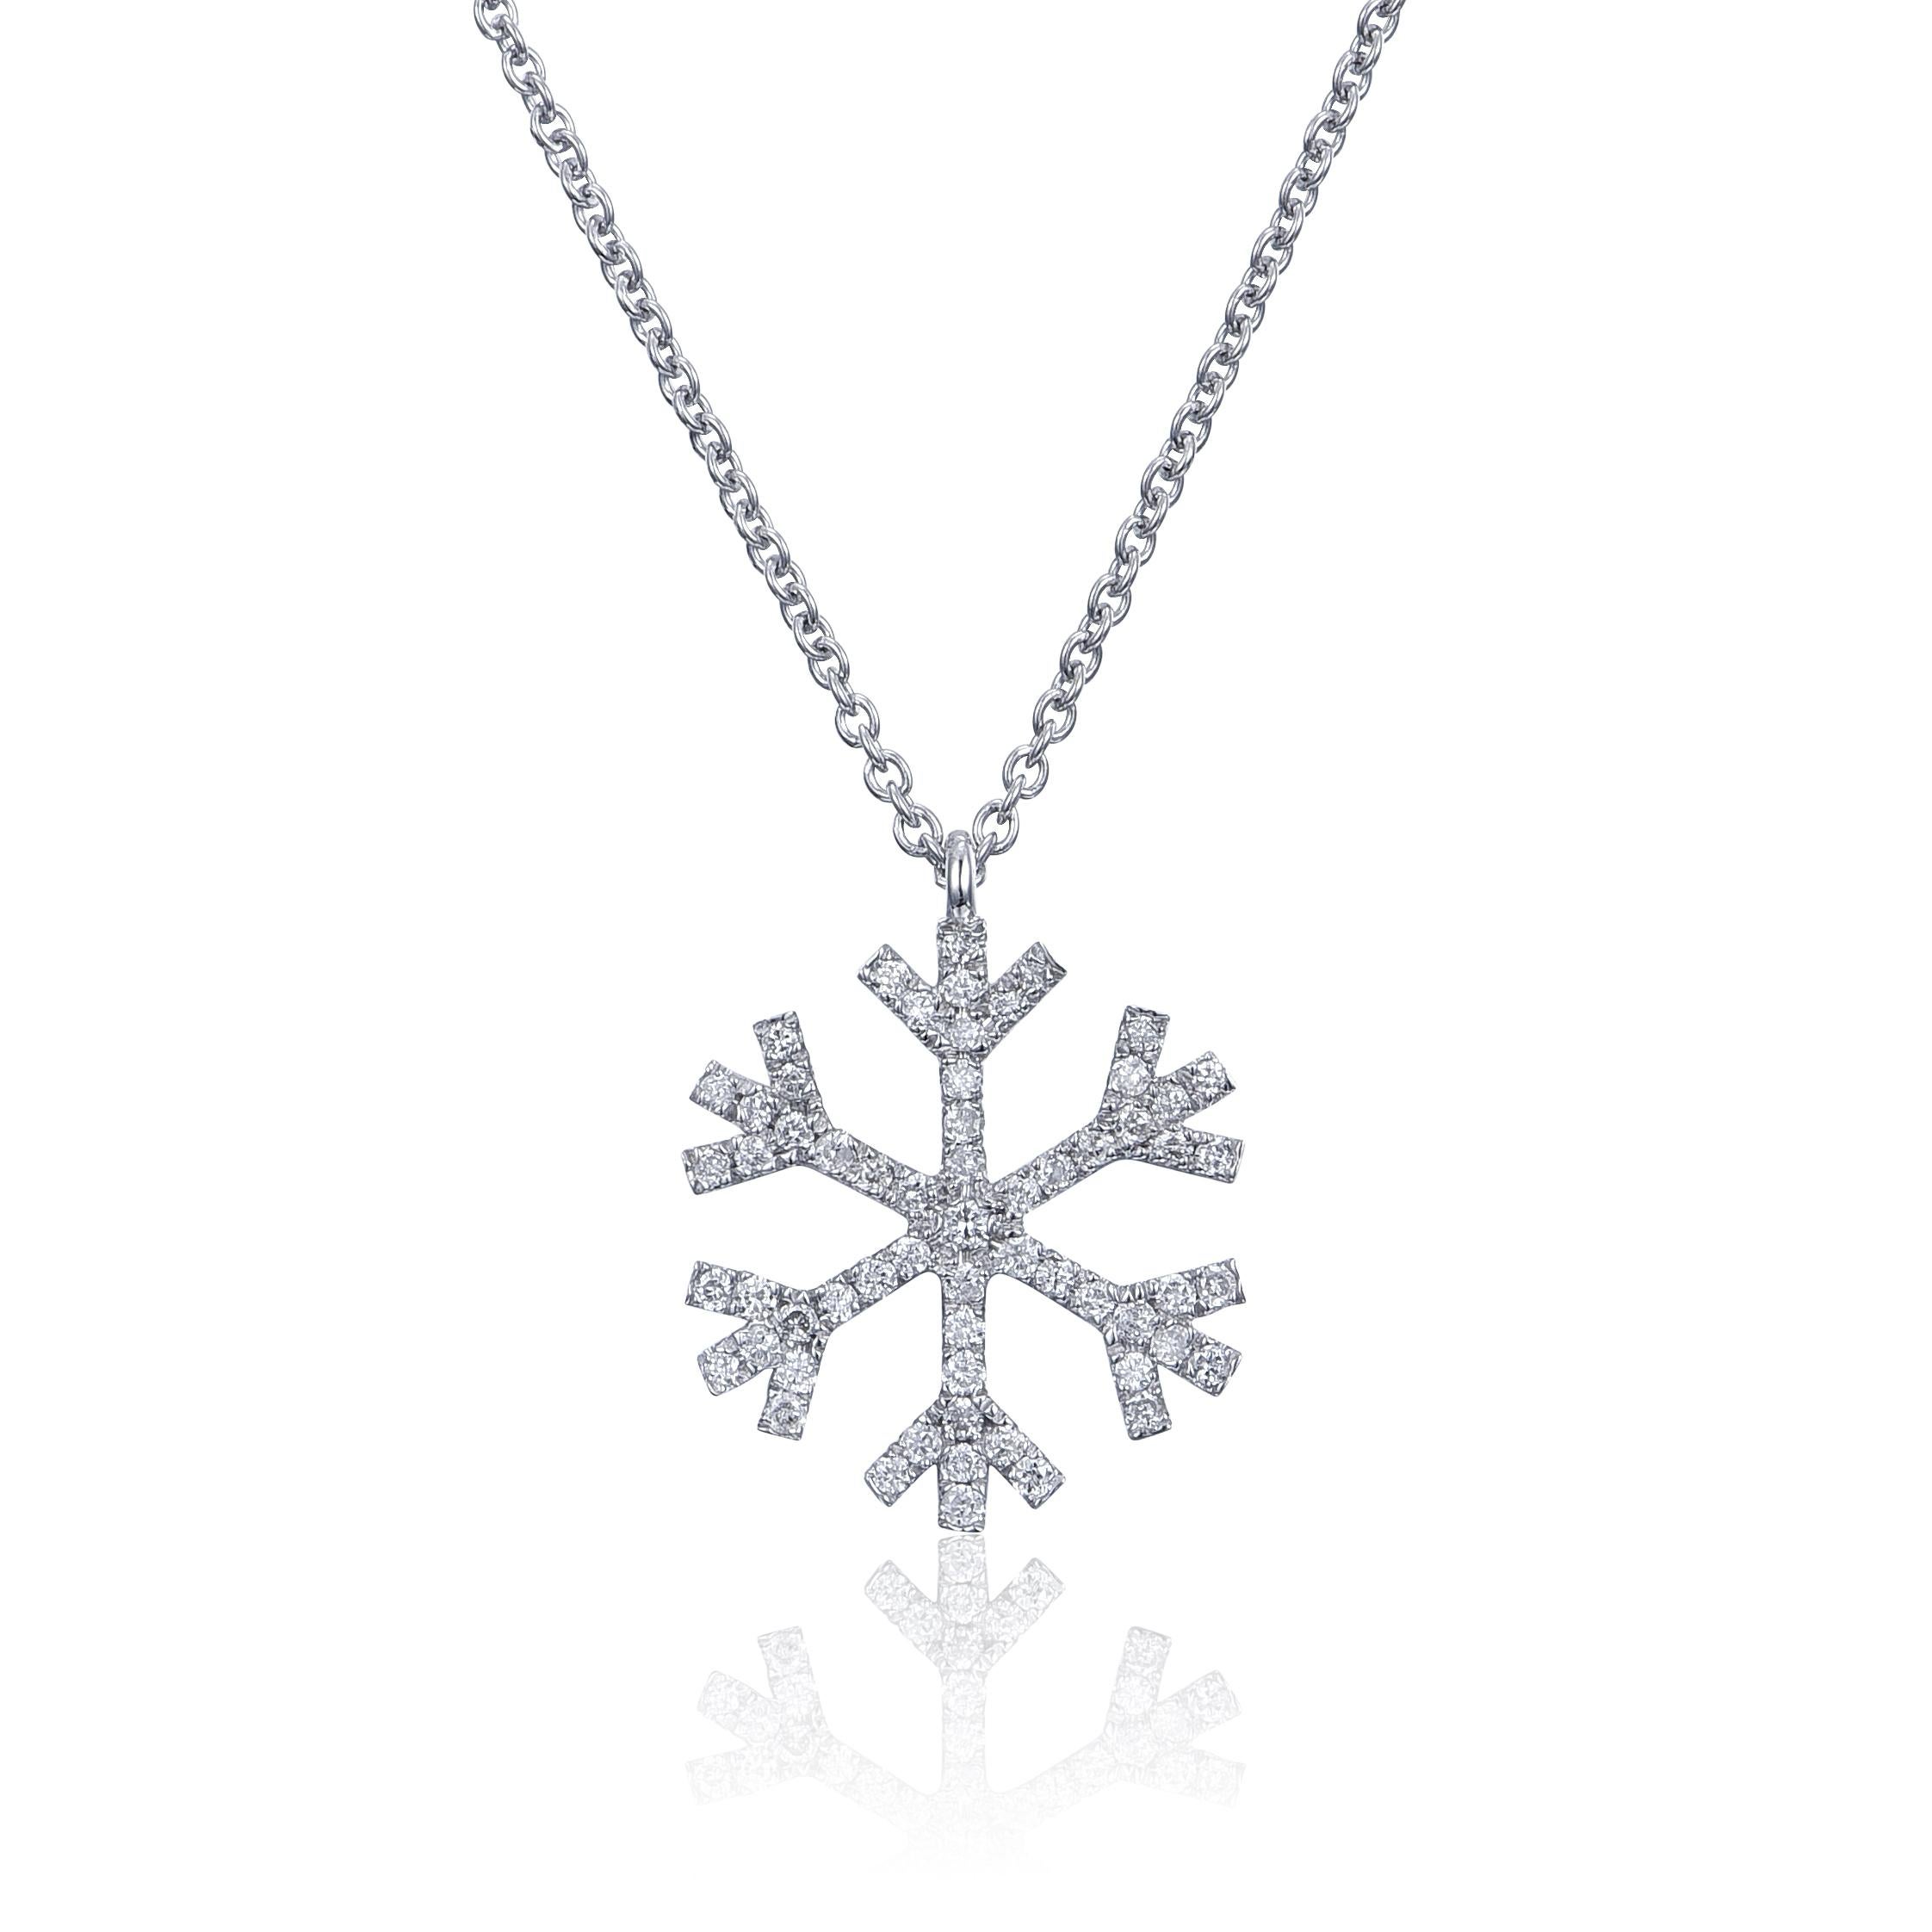 A diamond encrusted snowflake, 13.55mm, with  0.16ct round diamonds, G color, VS2 clarity is the perfect magical accessory. 